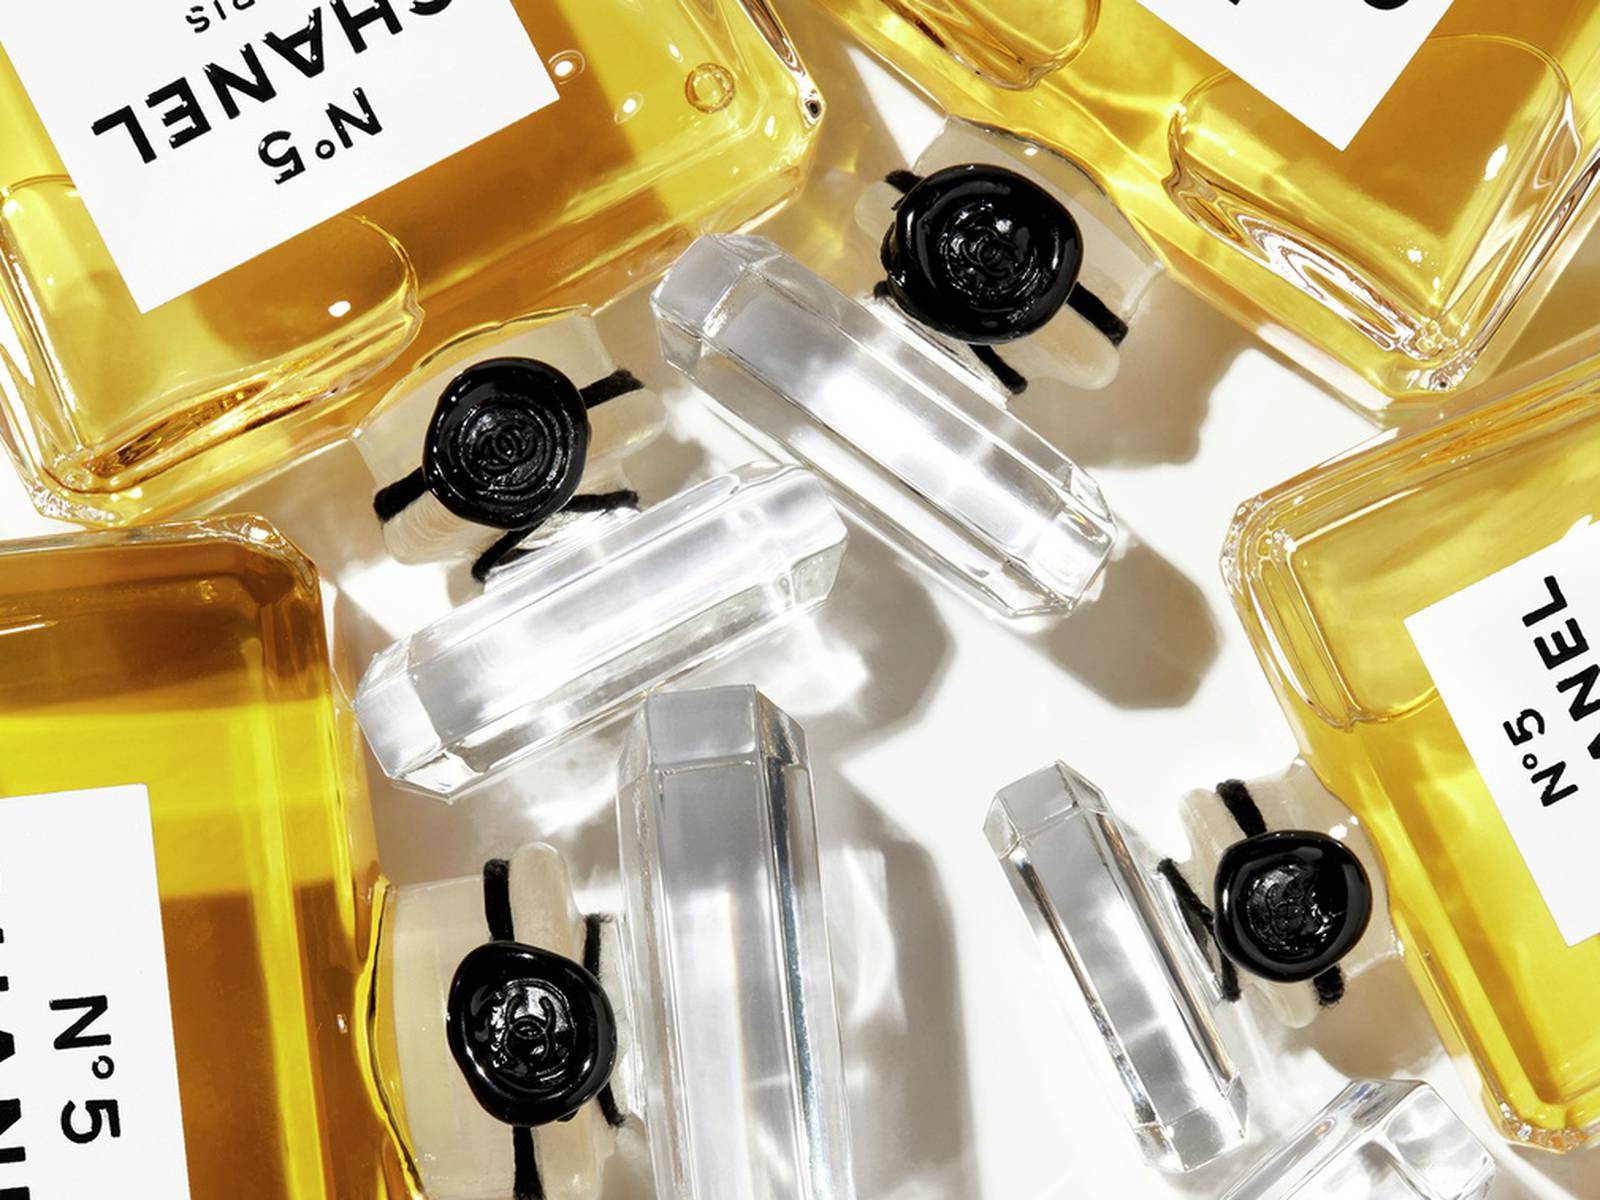 Chanel No. 5 – The World's Most Famous Perfume Turns 100